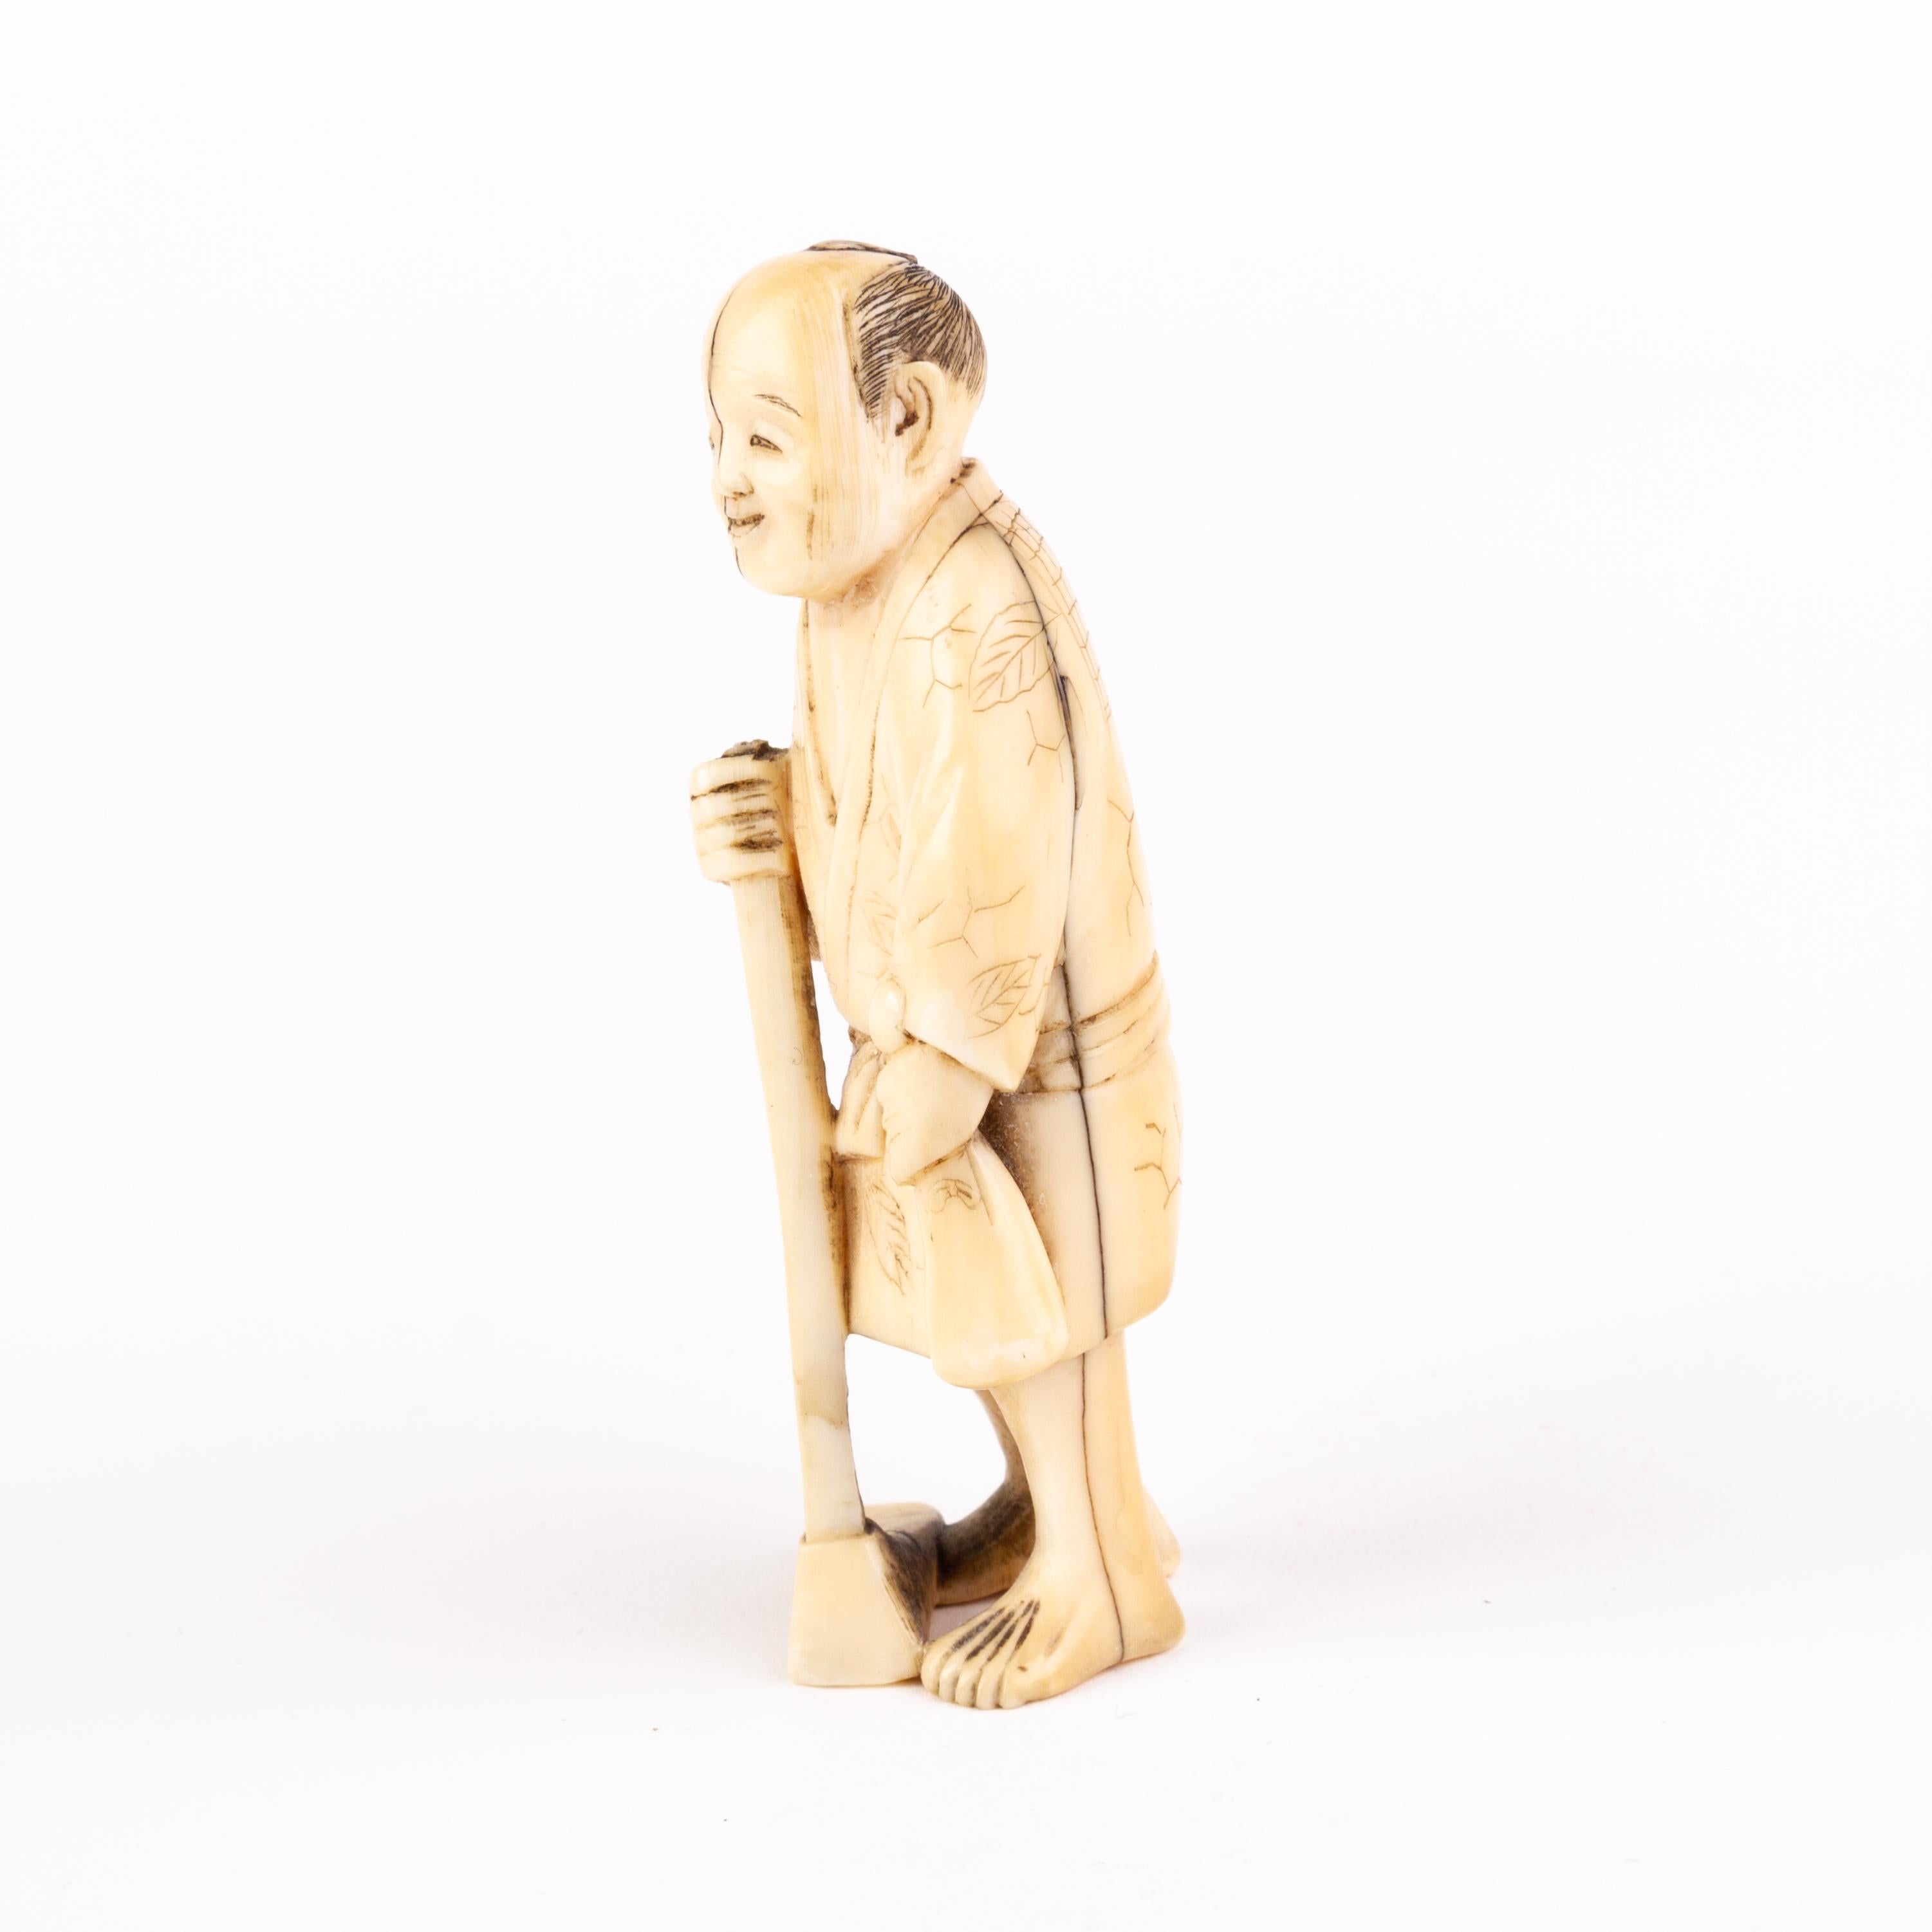 In good condition
From a private collection
Free international shipping
Japanese Okimono Farmer Figure Meiji